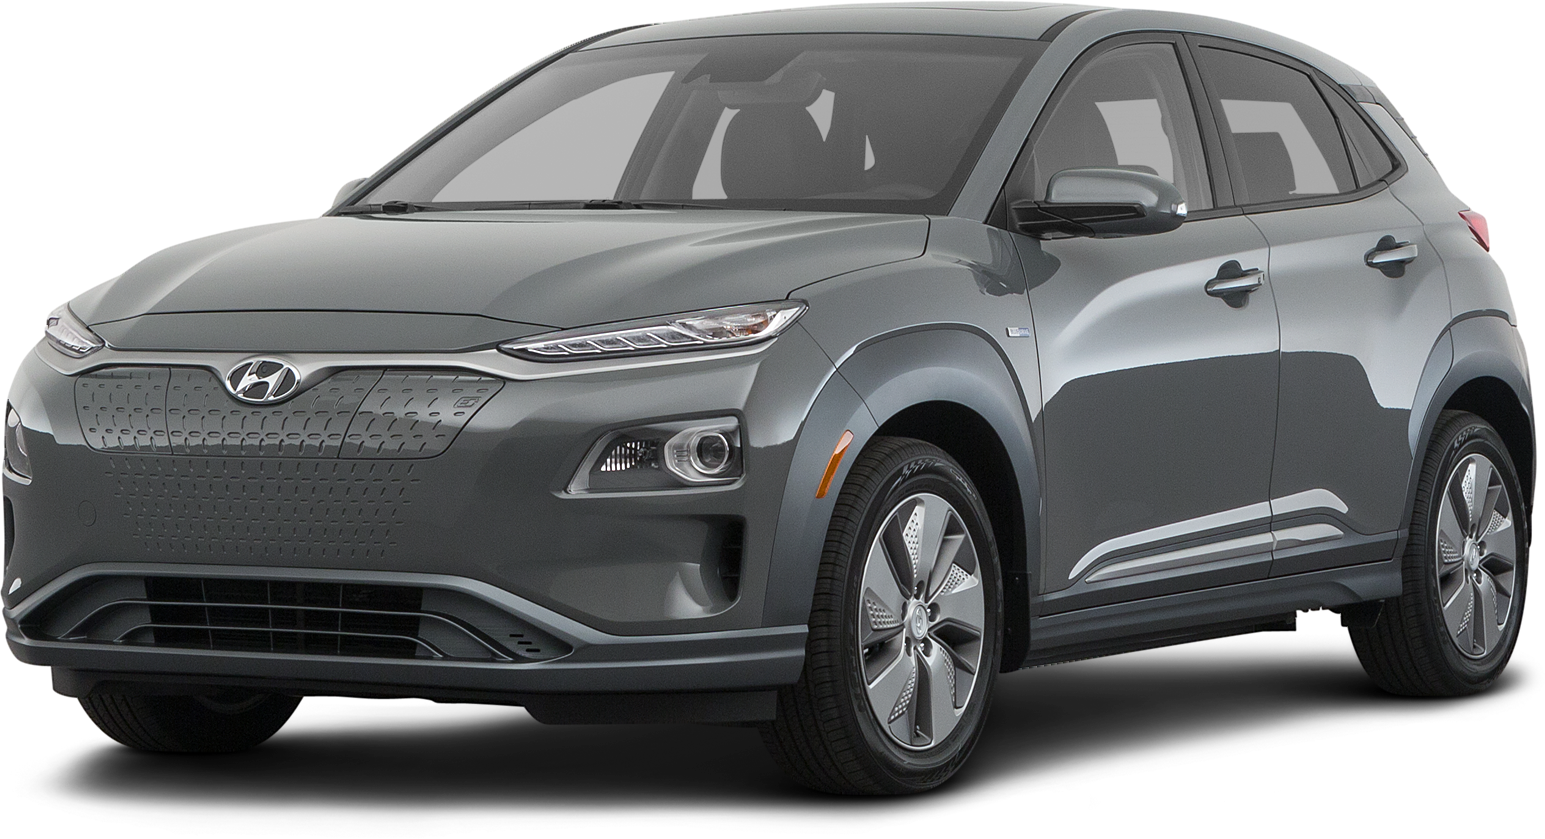 2019 Hyundai Kona Electric Incentives, Specials & Offers in Duluth GA